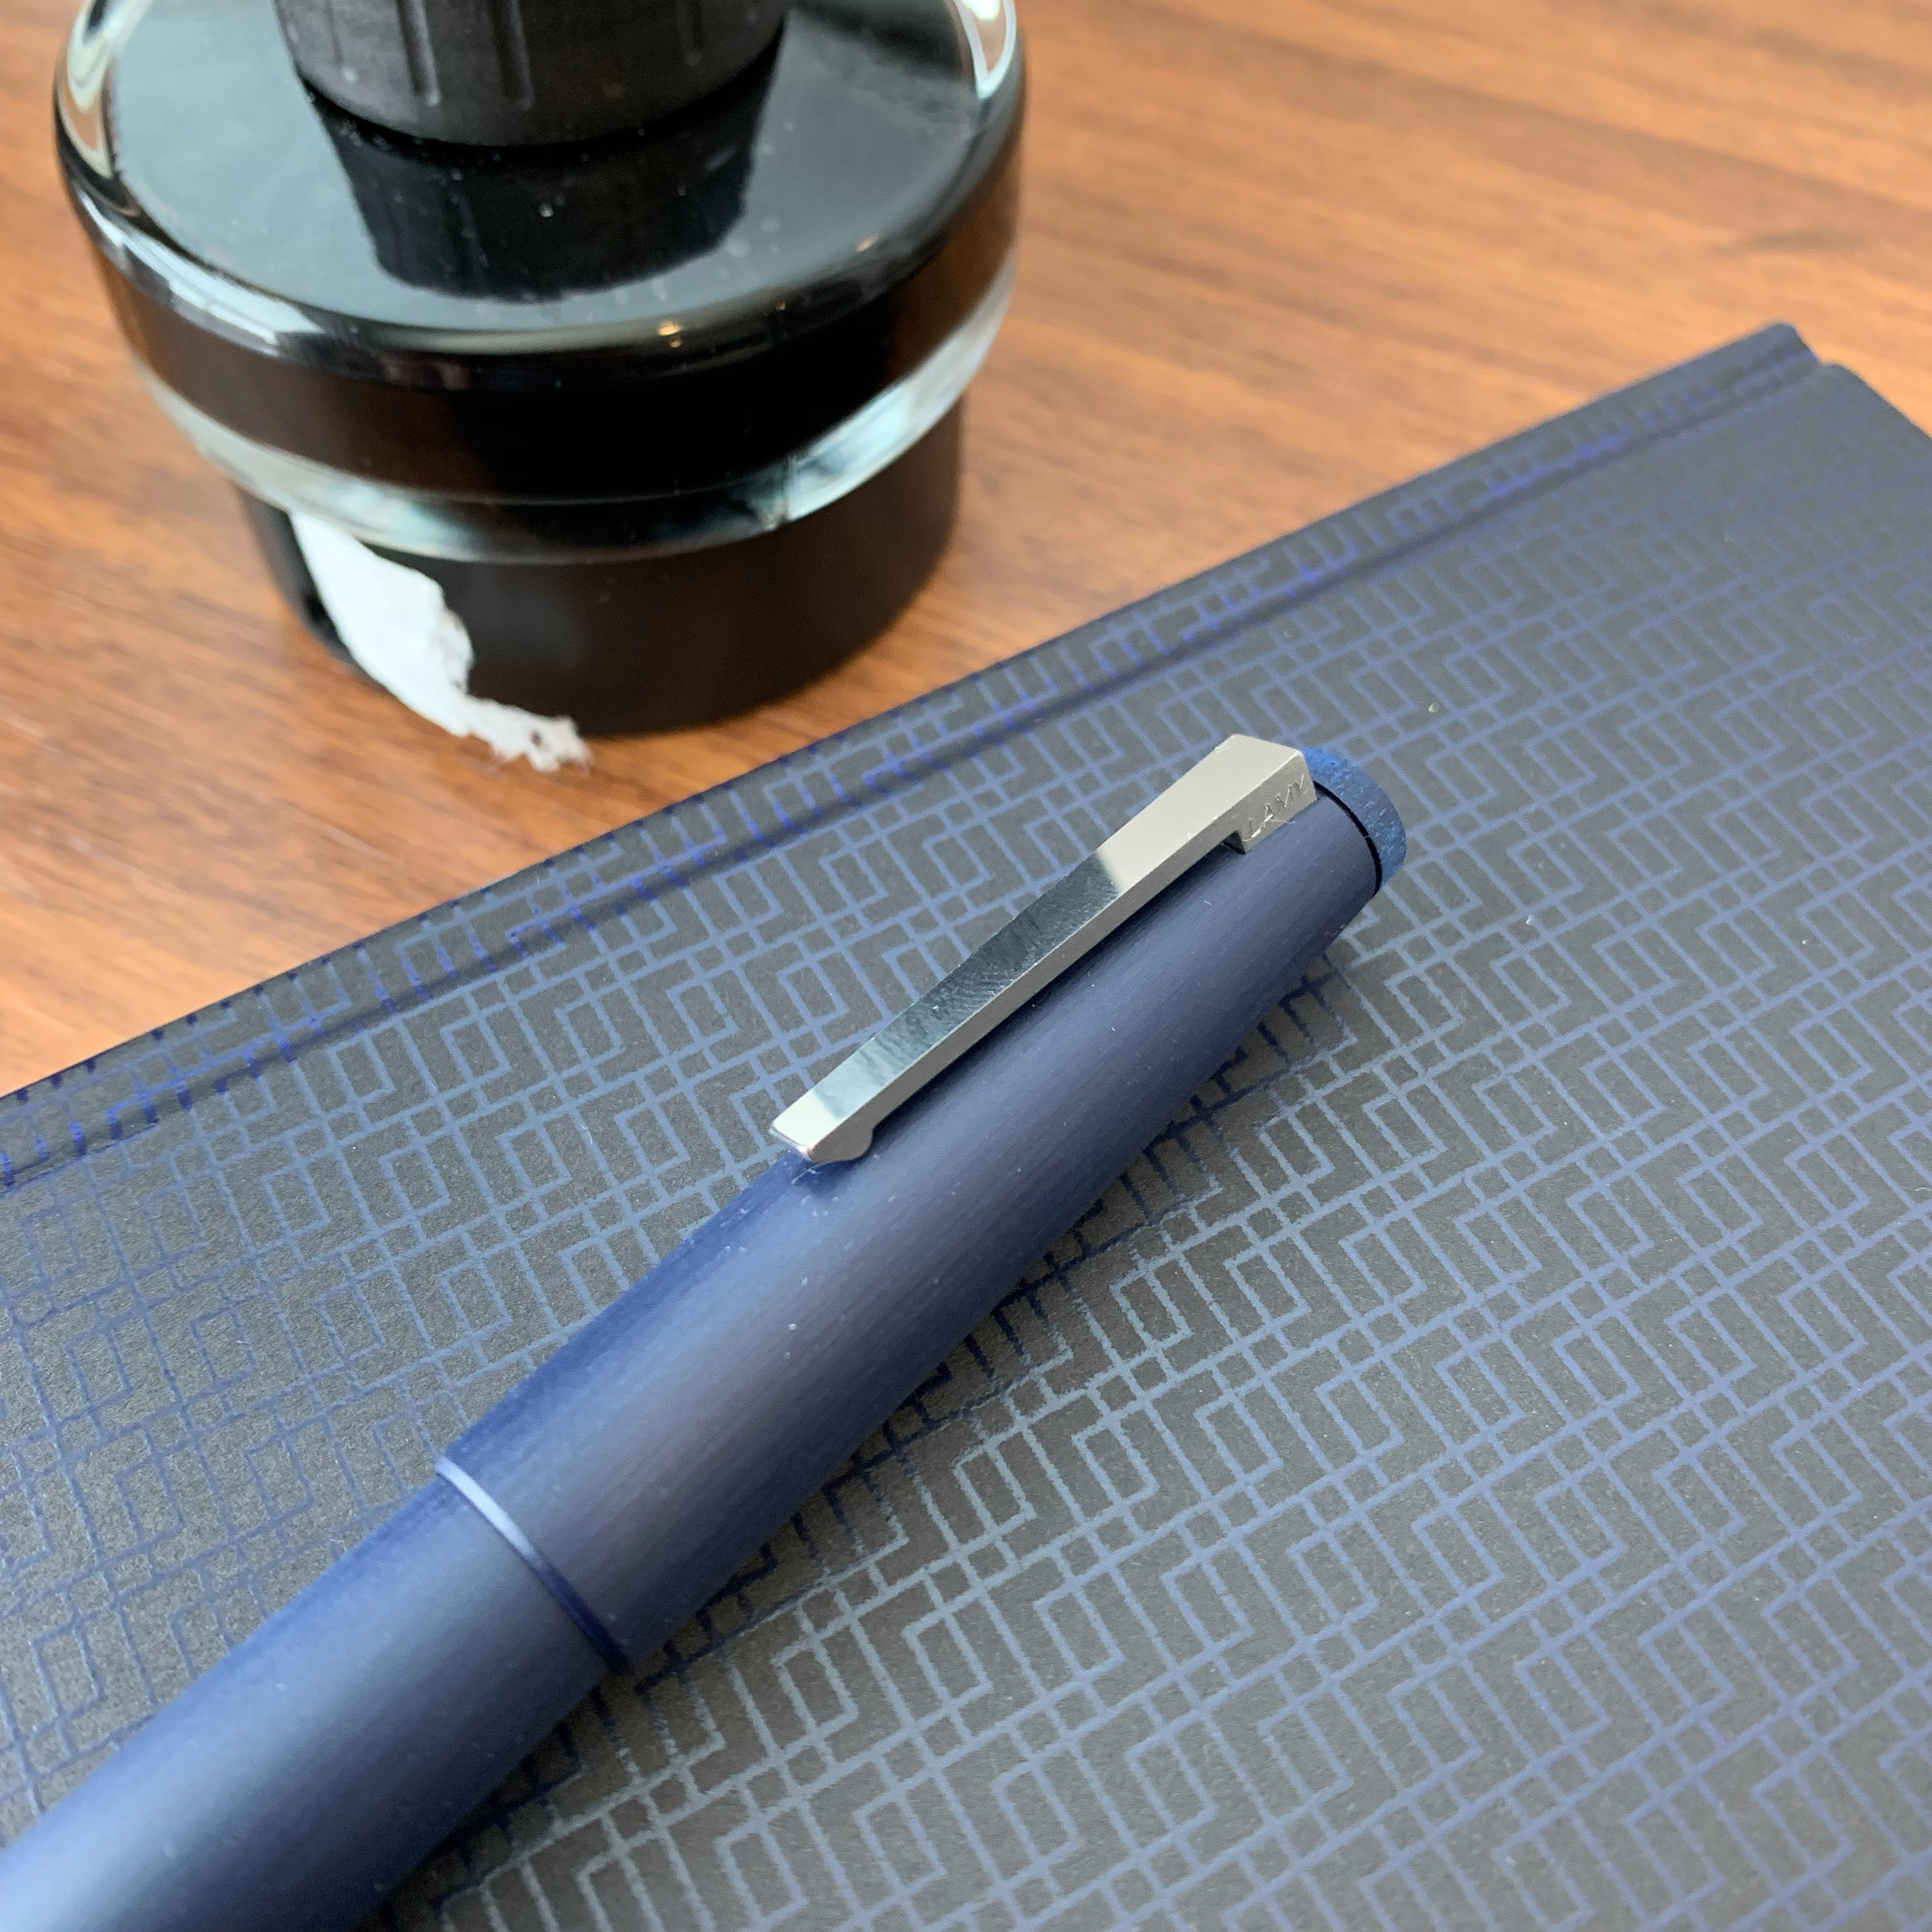 This Pen Uses No Ink. So How Does it Write?